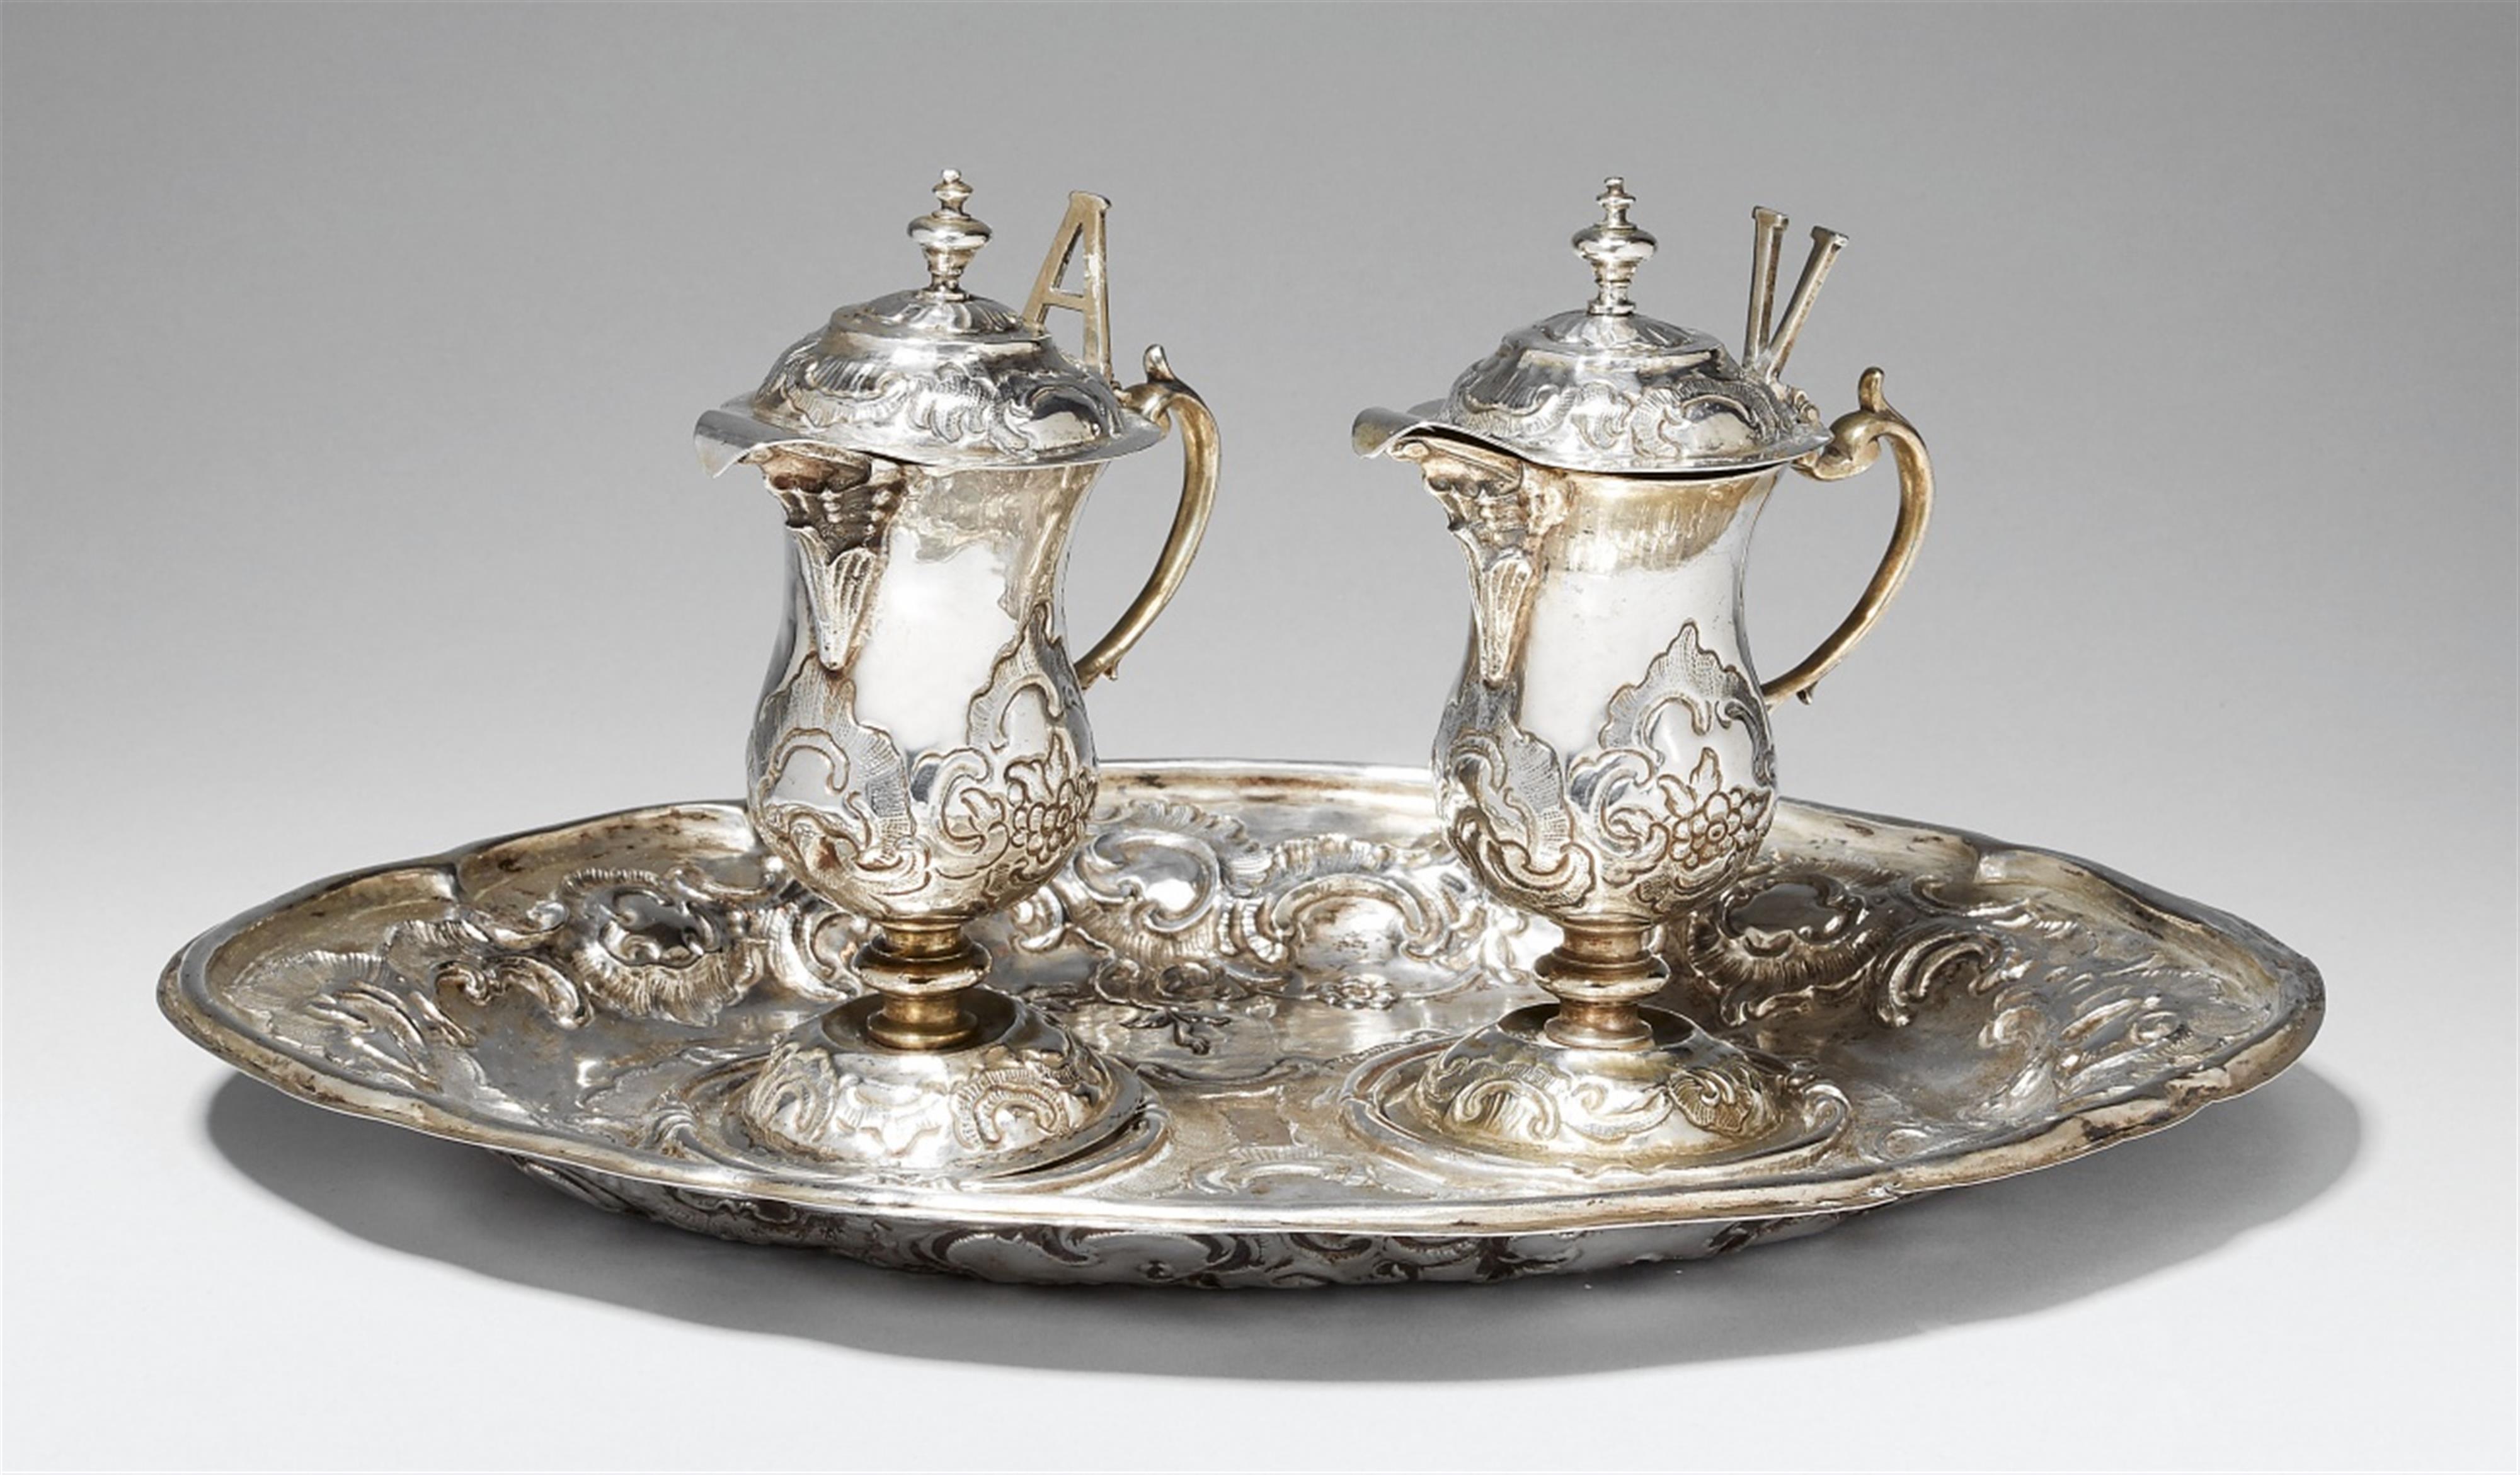 An Augsburg partially gilt silver communion garniture. Comprising wine and water jugs and a tray. With minor dents. Marks of Franz Anton Lang, 1767 - 69. - image-1